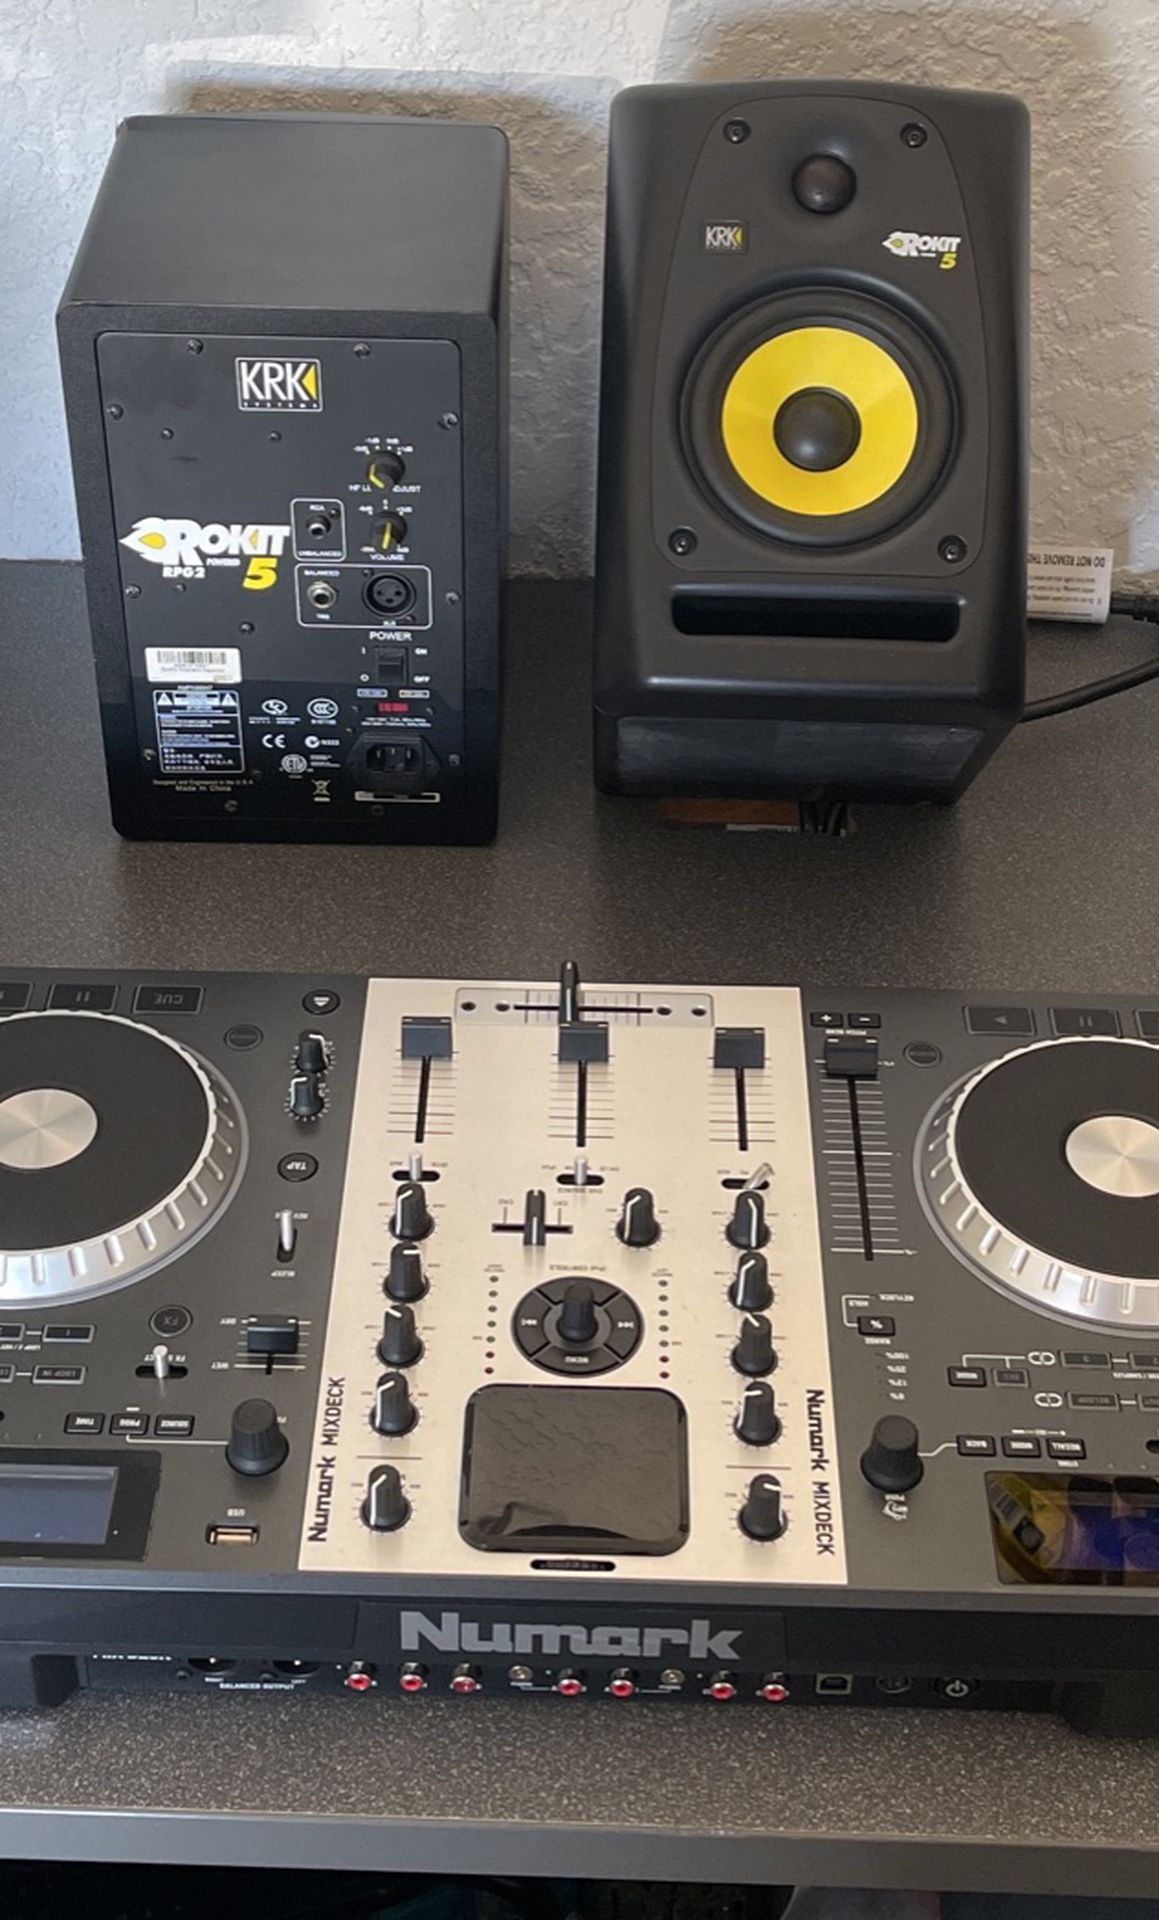 Numark Mixdeck With KRK 5 Speakers and Stands